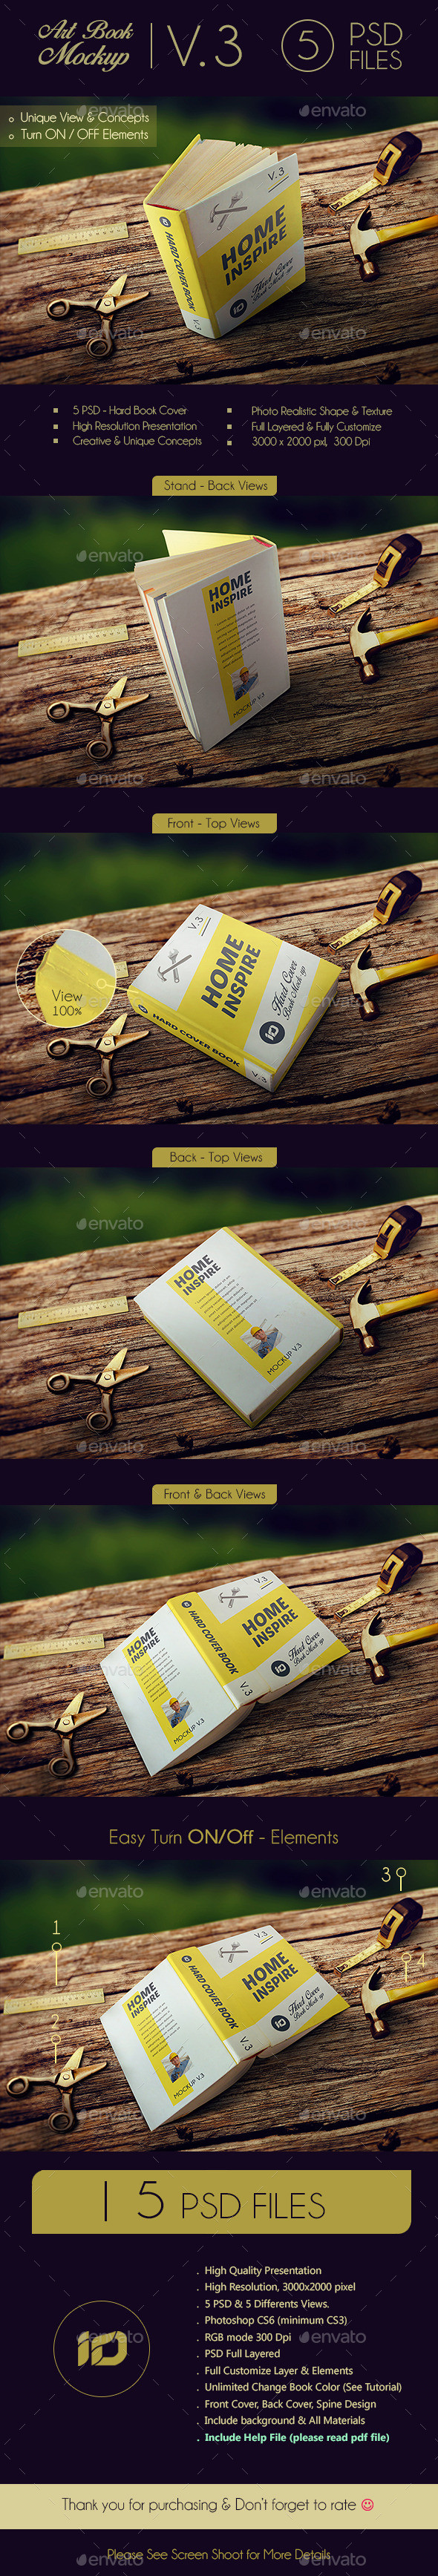 Preview id book v.3 by idsains